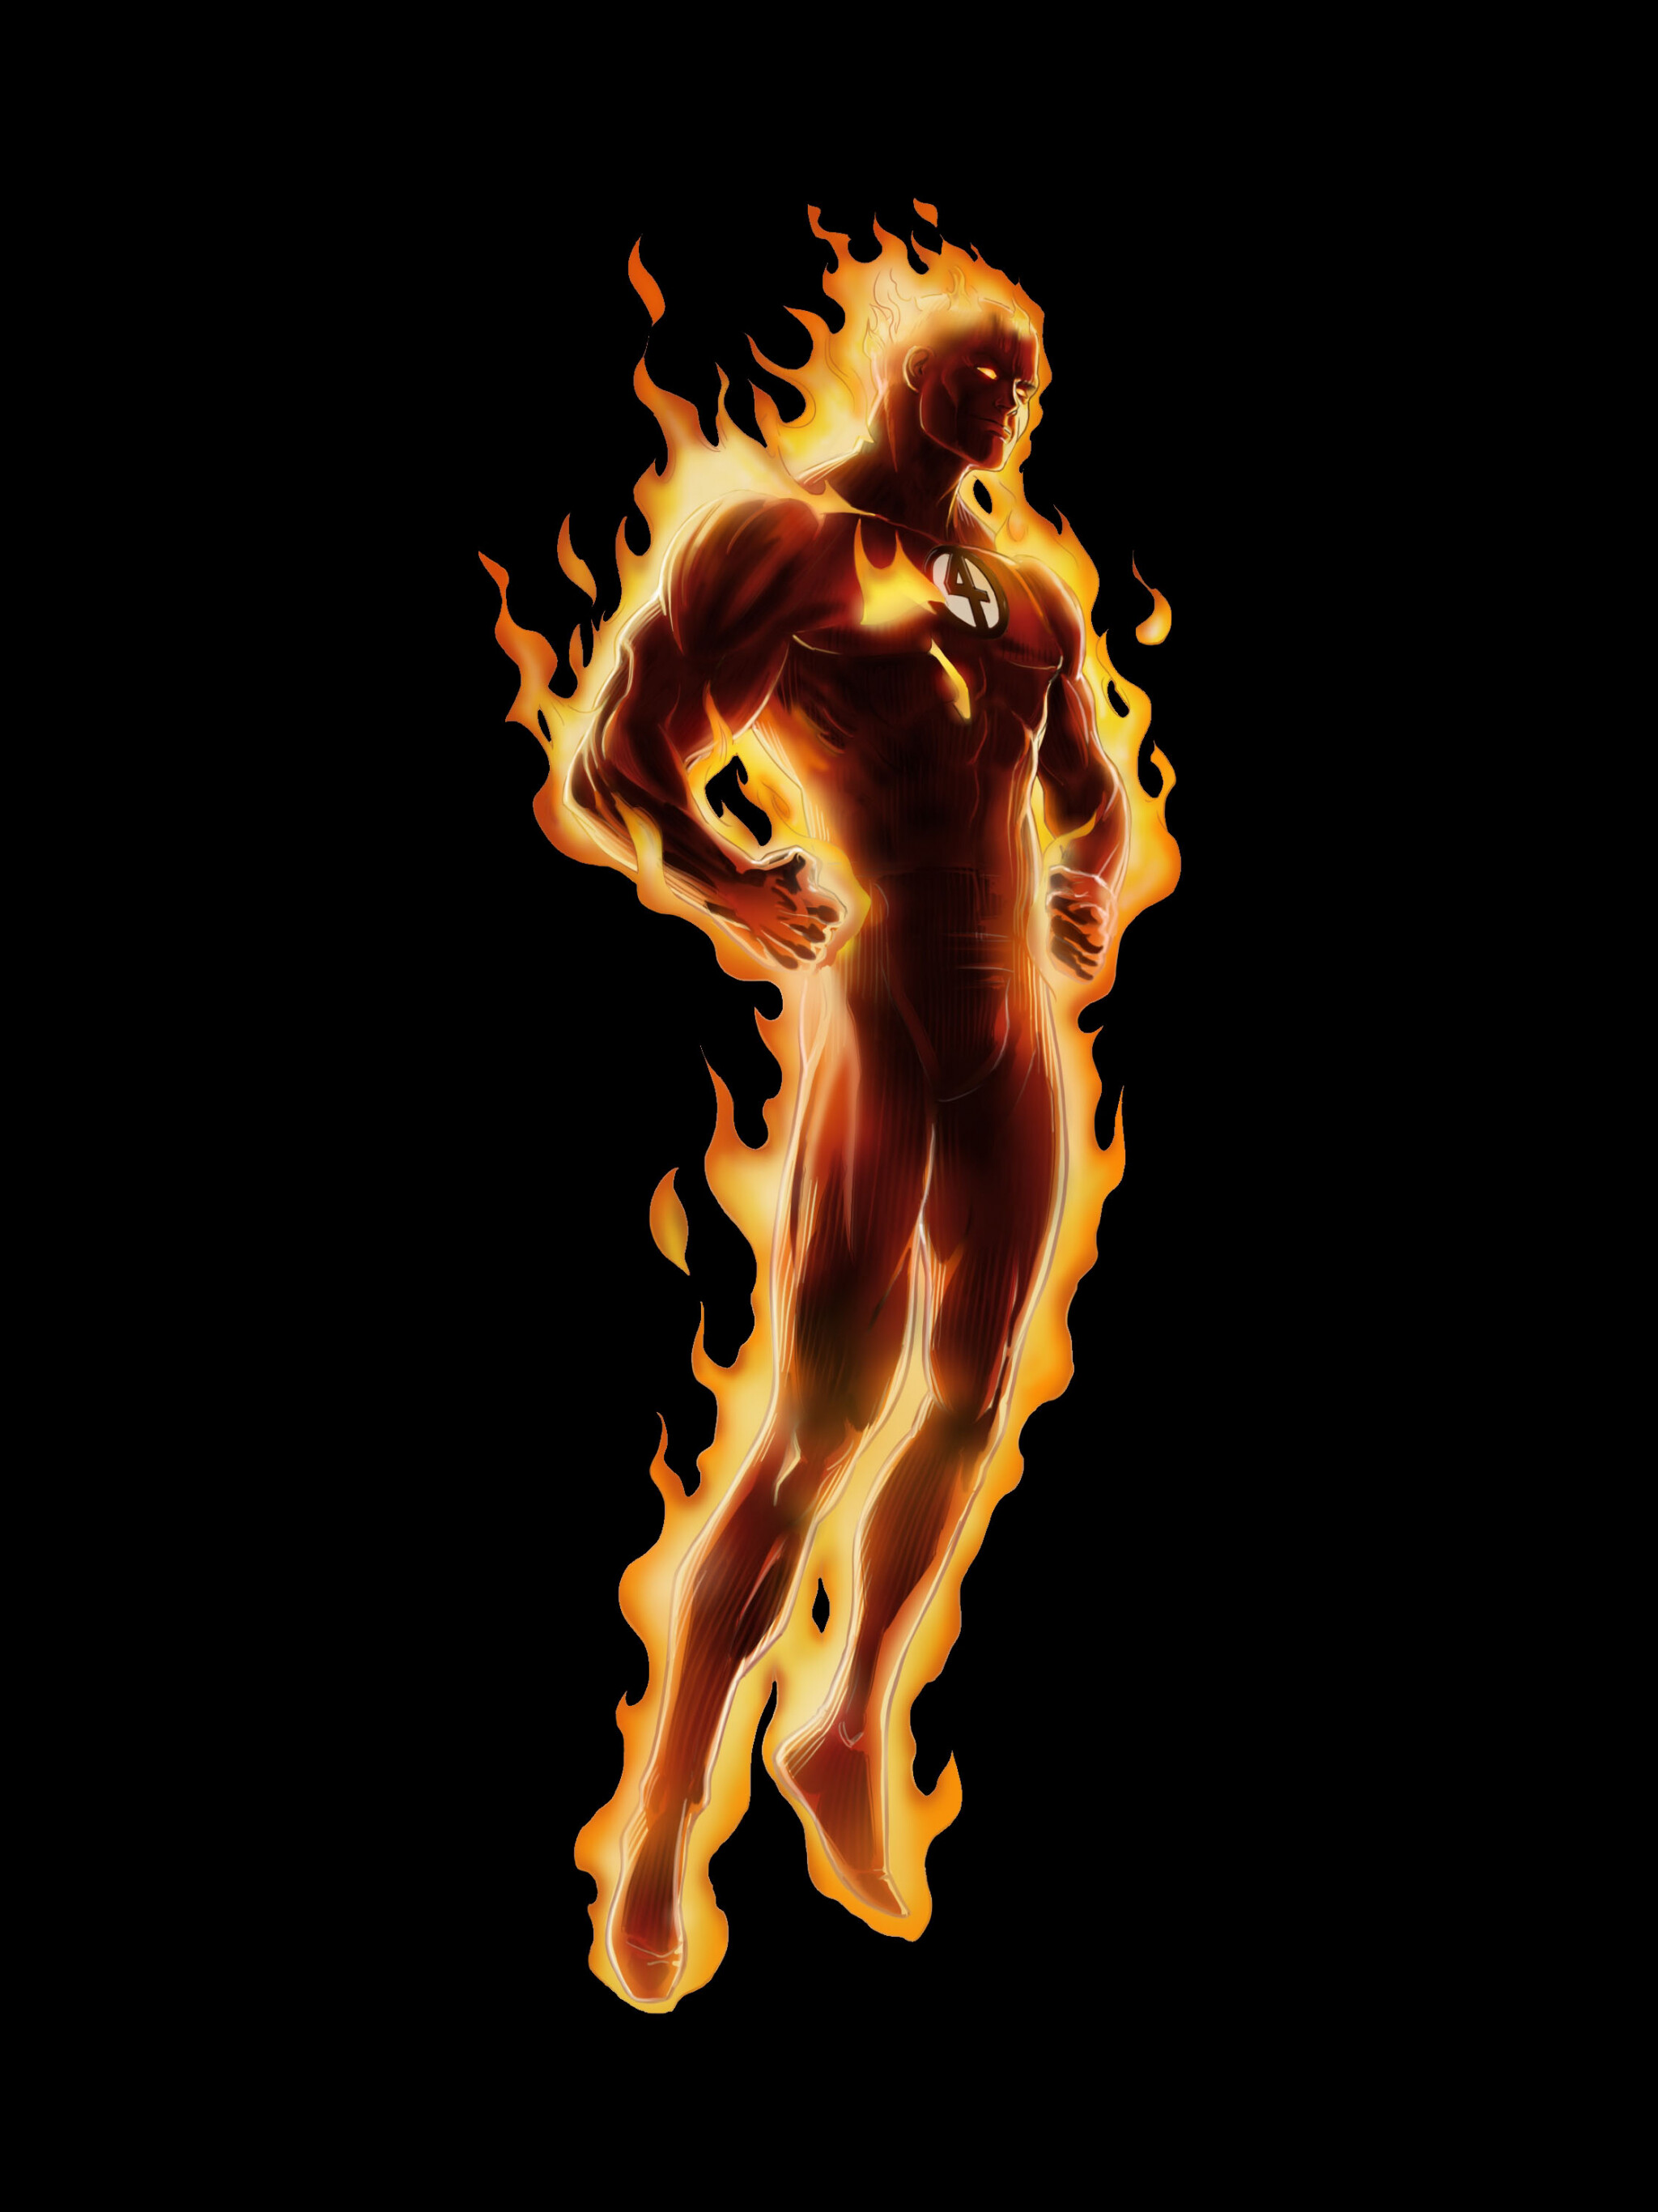 Human Torch: Possessed the ability to surround himself with fire and control flames. 2050x2740 HD Wallpaper.